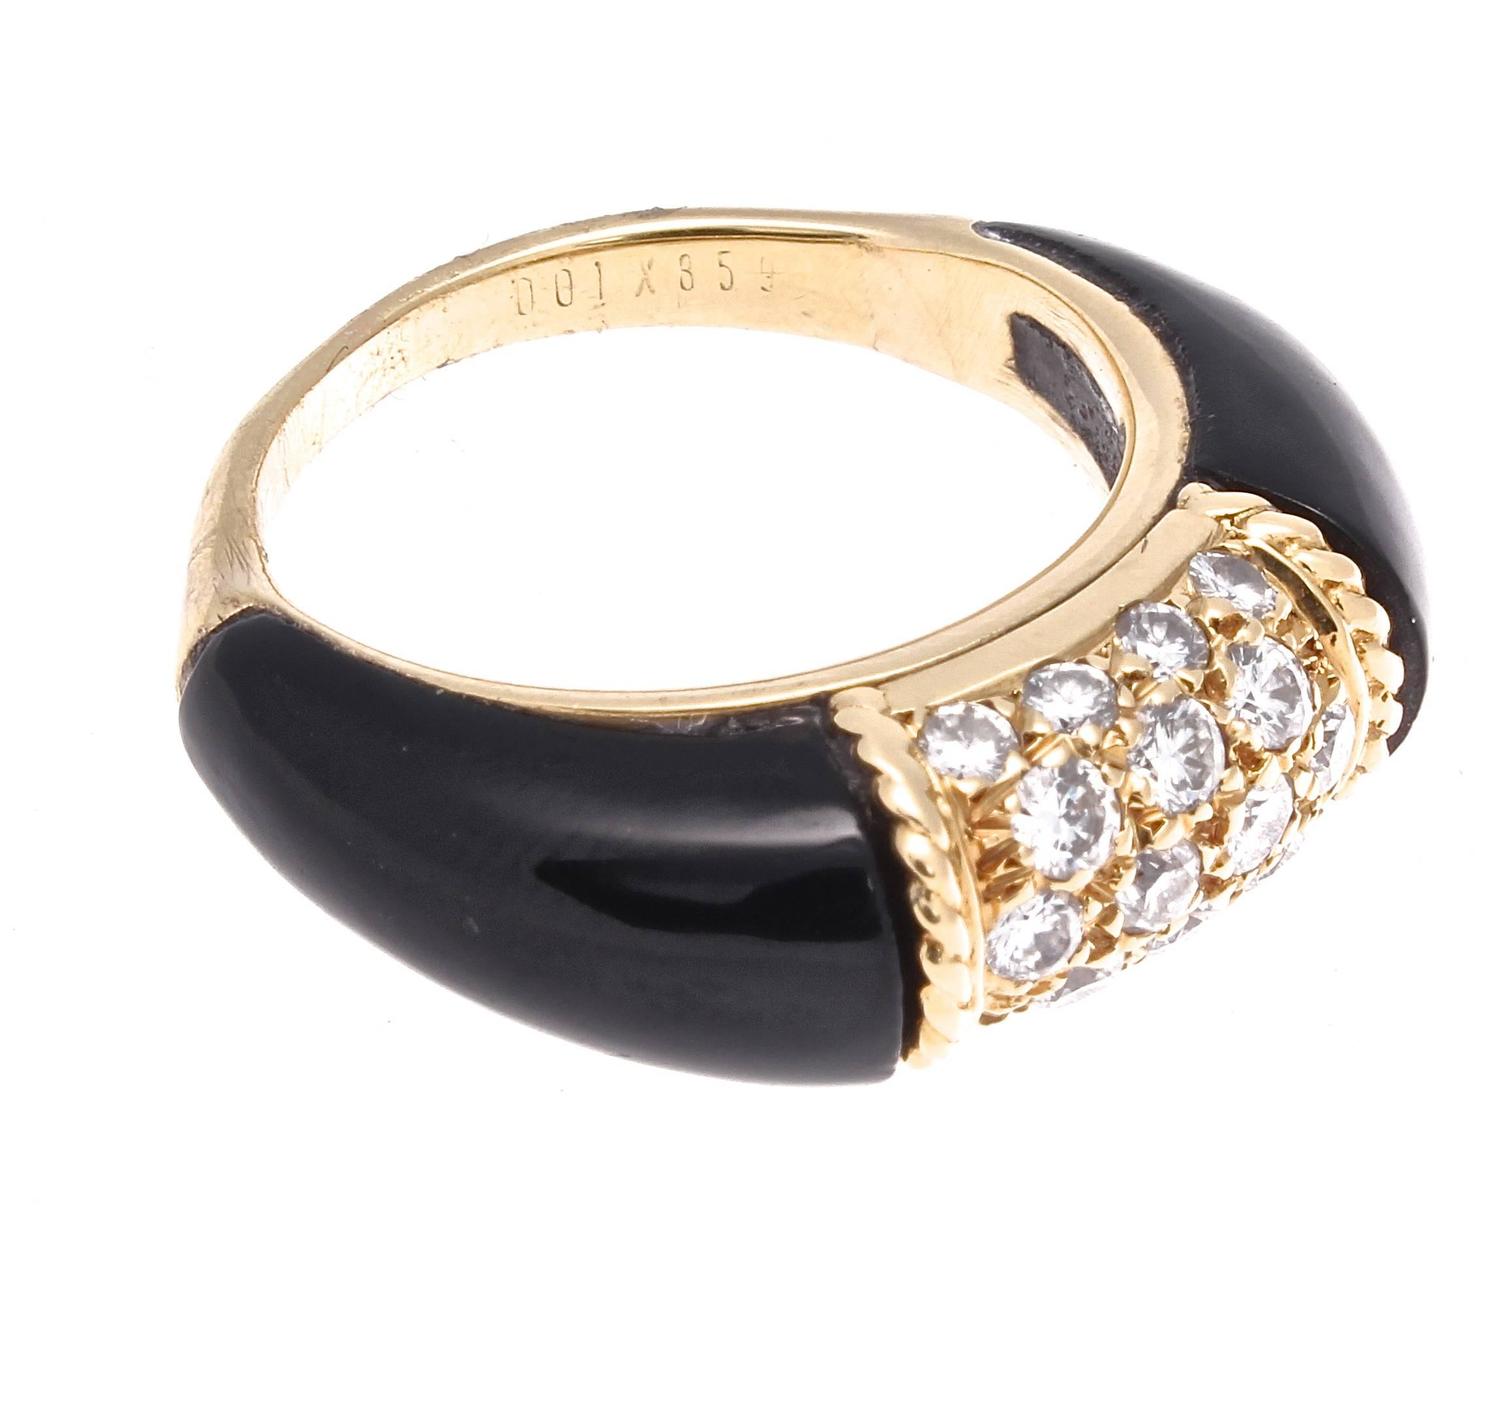 Van Cleef and Arpels Philippine Diamond Gold Ring at 1stdibs